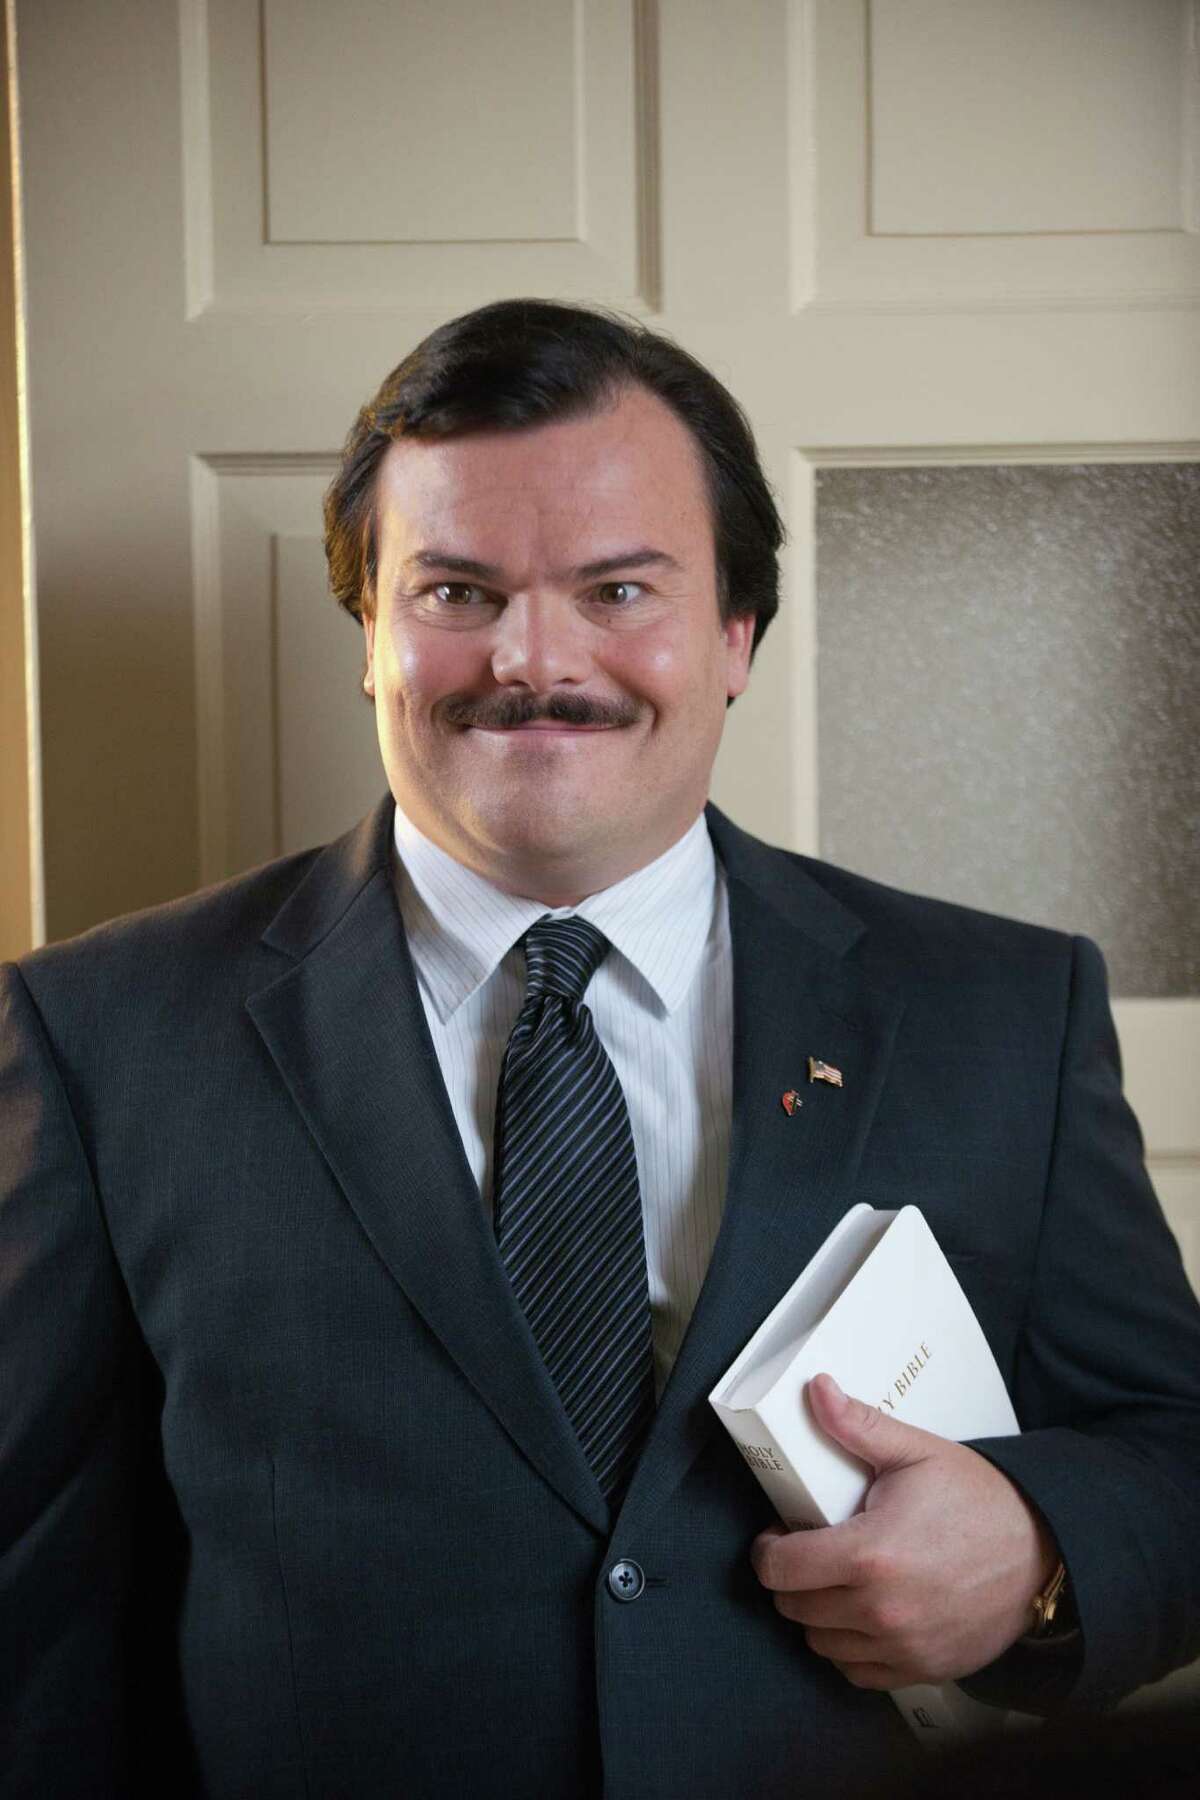 Jack Black stars as the title character in "Bernie."